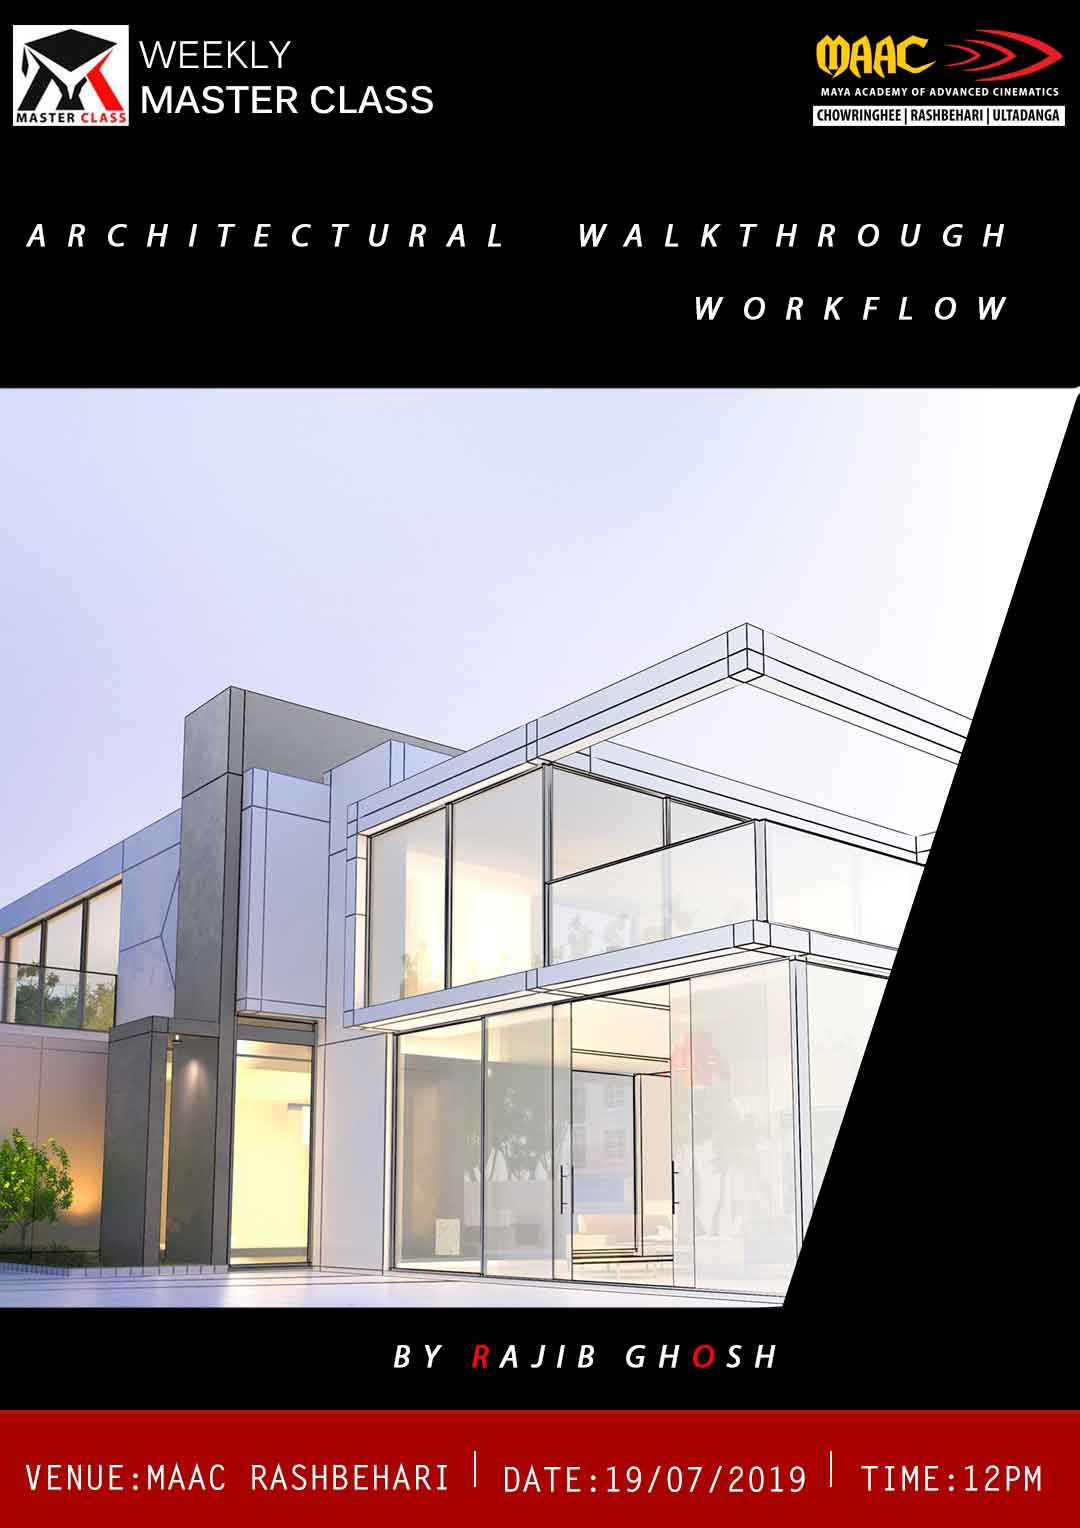 Weekly Master Class on Architectural Walkthrough Workflow